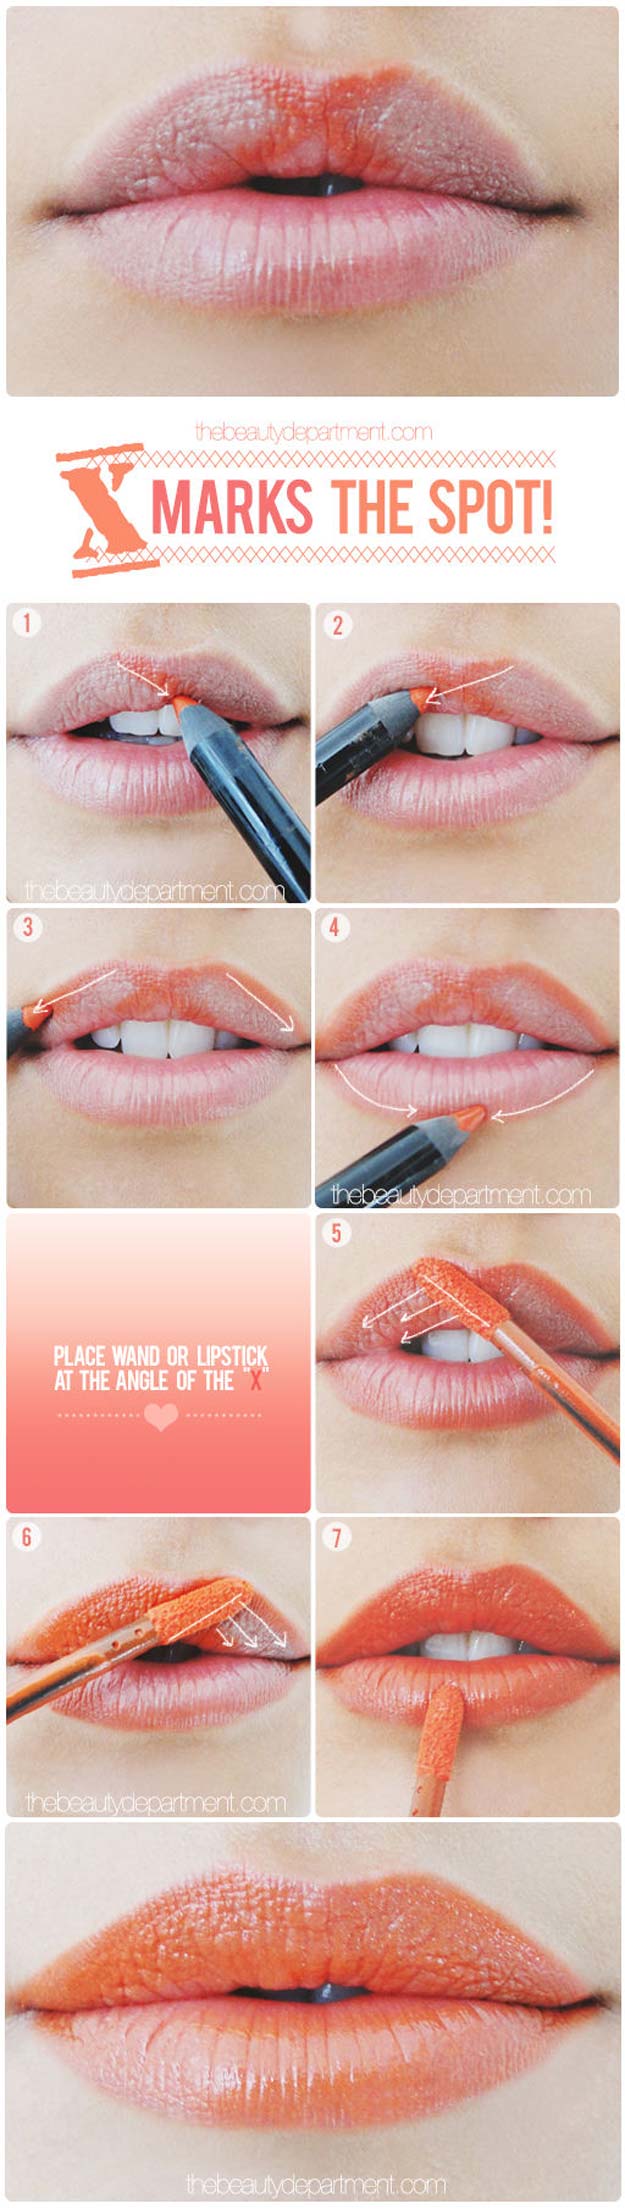 Best Makeup Tutorials for Teens -A Little Lip Trick - Easy Makeup Ideas for Beginners - Step by Step Tutorials for Foundation, Eye Shadow, Lipstick, Cheeks, Contour, Eyebrows and Eyes - Awesome Makeup Hacks and Tips for Simple DIY Beauty - Day and Evening Looks 